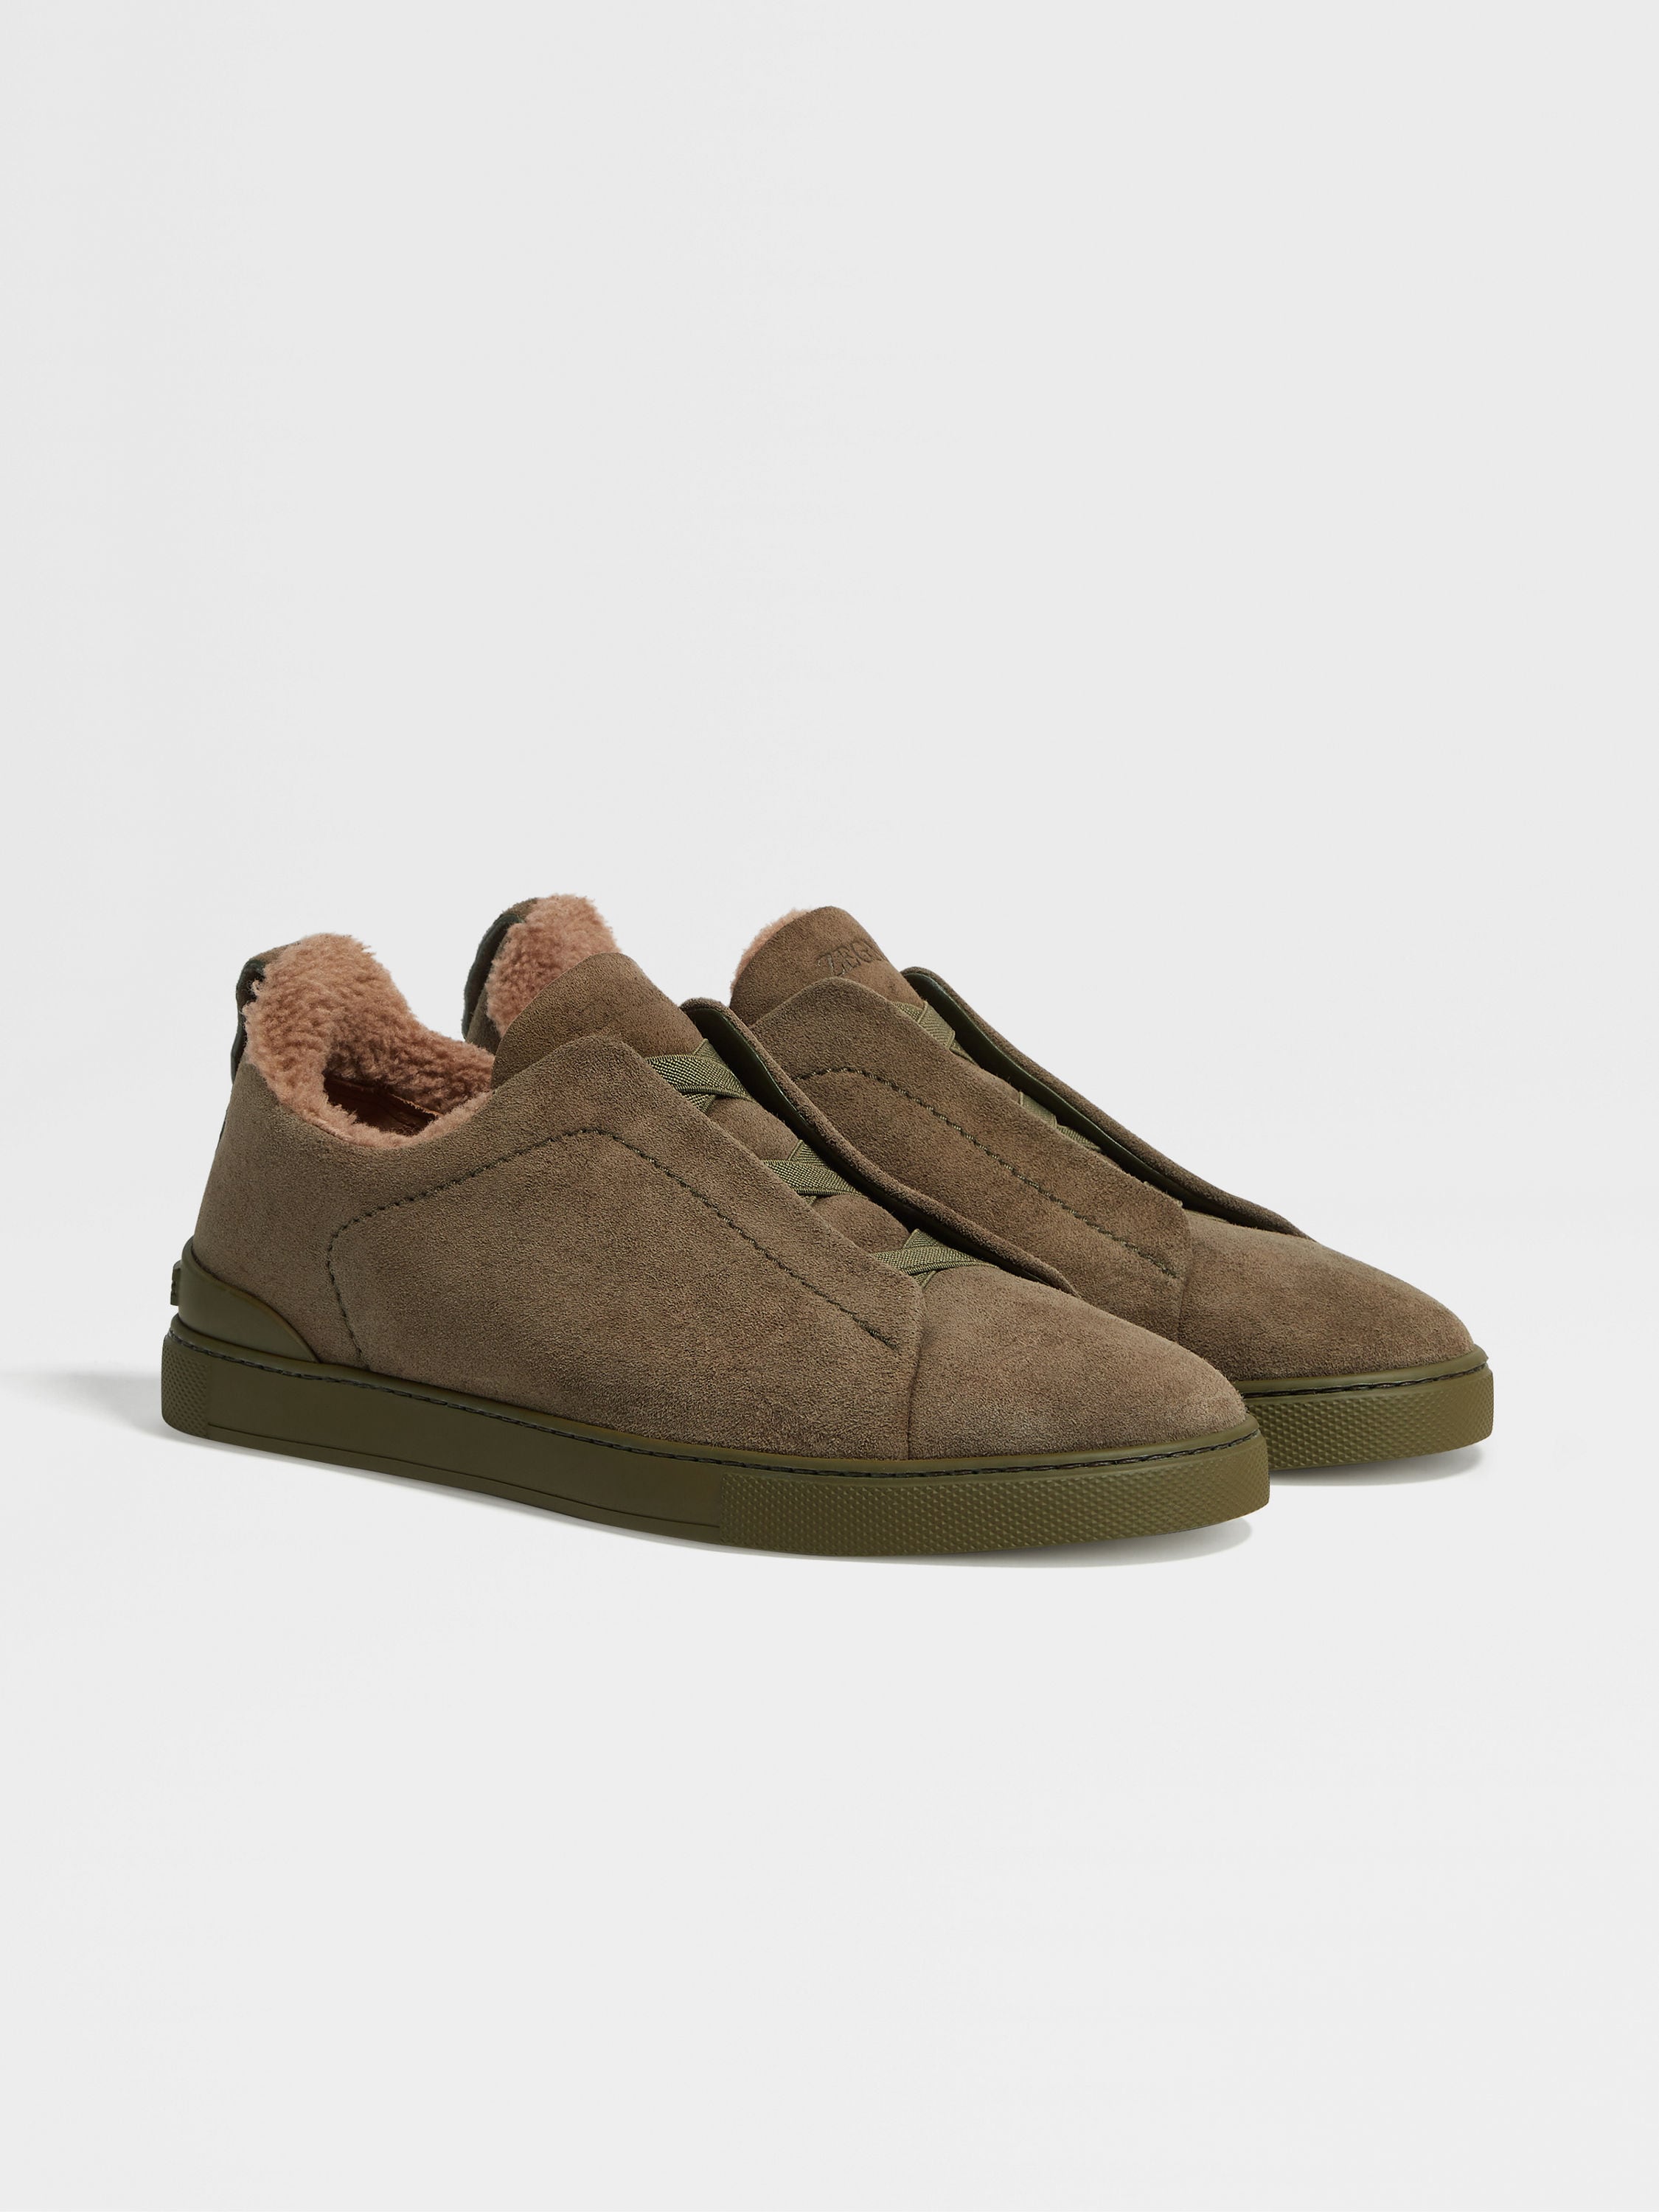 Olive Green Suede Triple Stitch™ Sneakers FW23 27874146 | Zegna GB